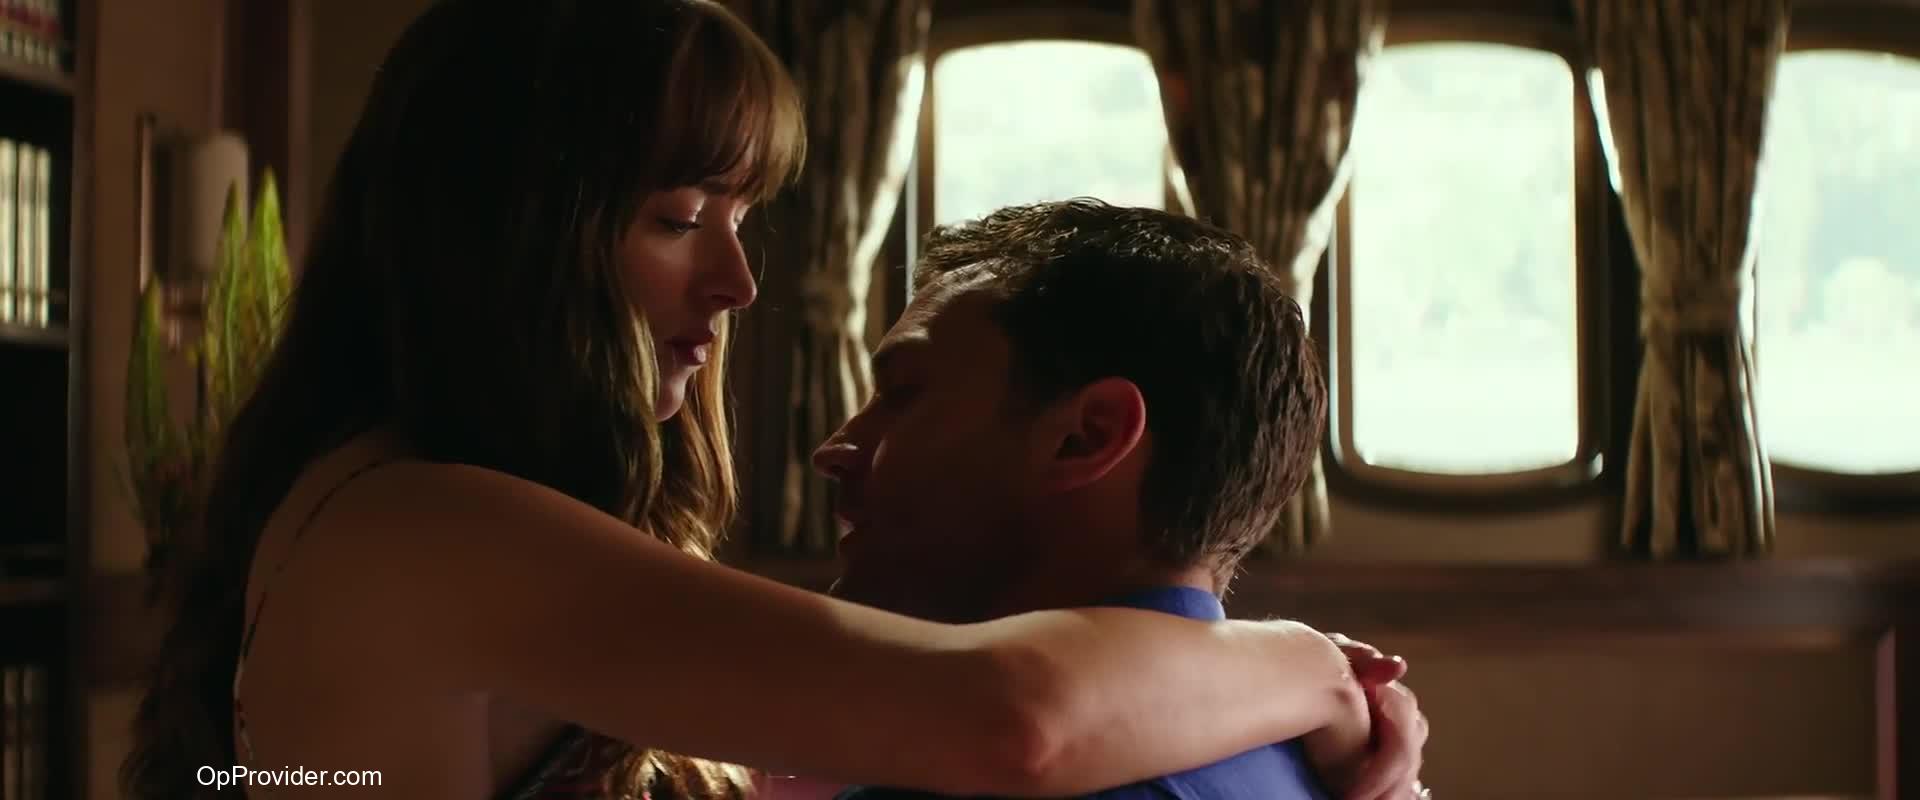 Download Fifty Shades Freed (2018) Full Movie in 480p 720p 1080p